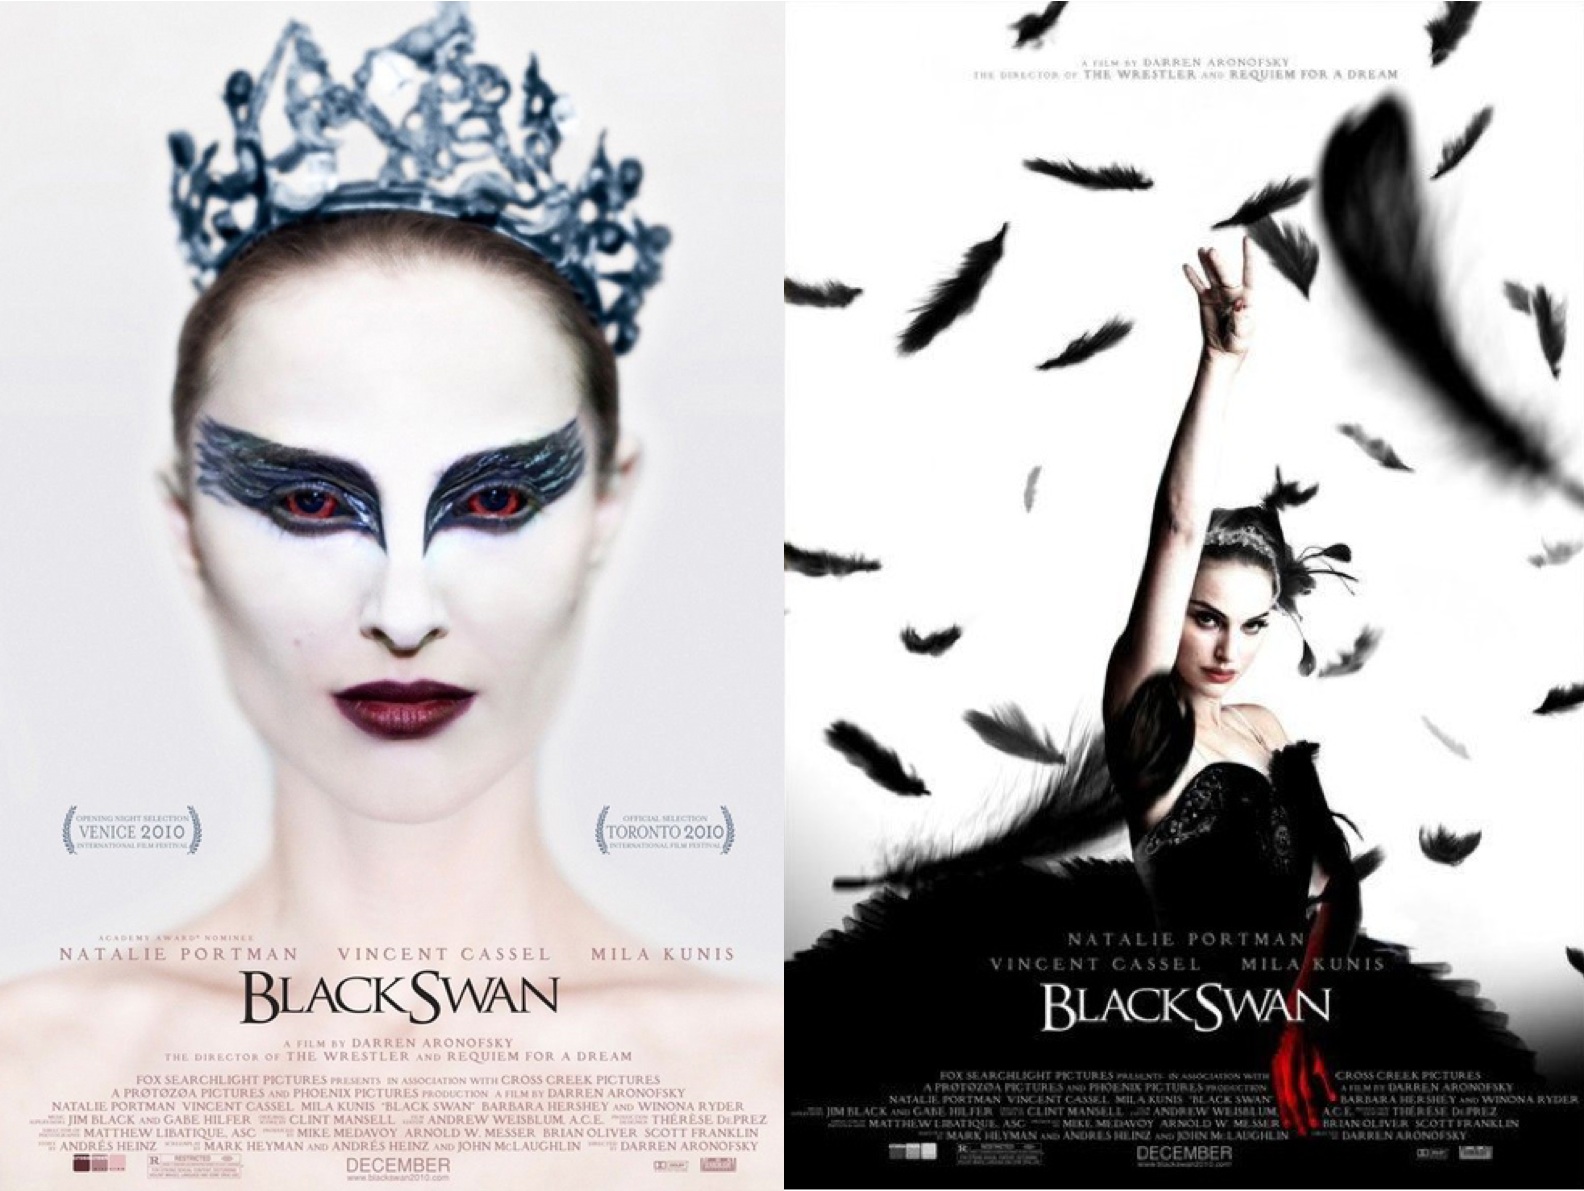 Why I hated Black Swan & don’t think it deserves any Oscars